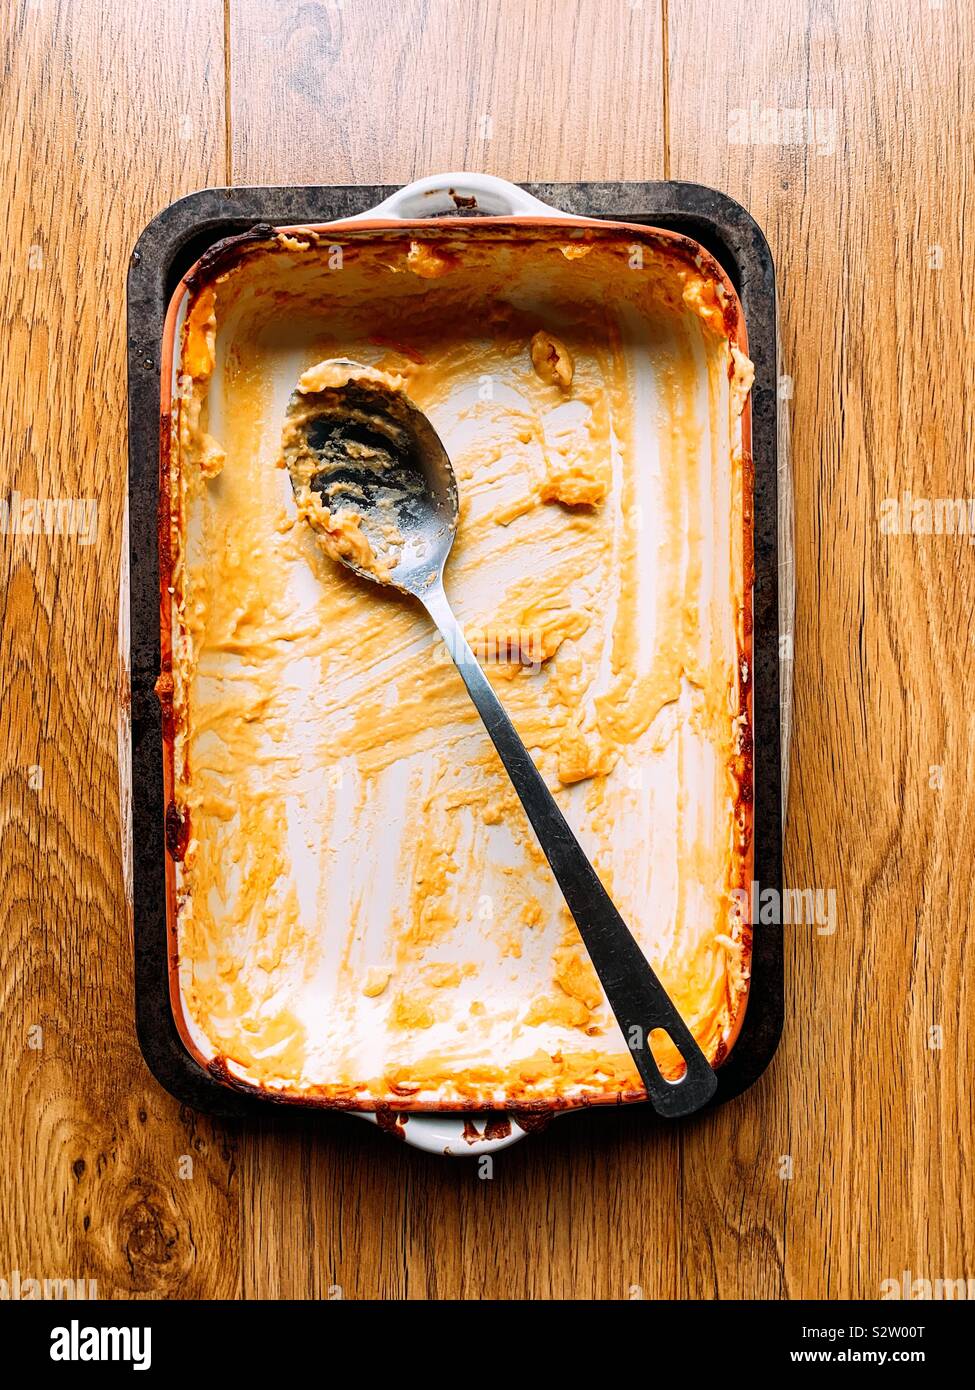 Empty casserole dish after a family meal with a metal spoon Stock Photo